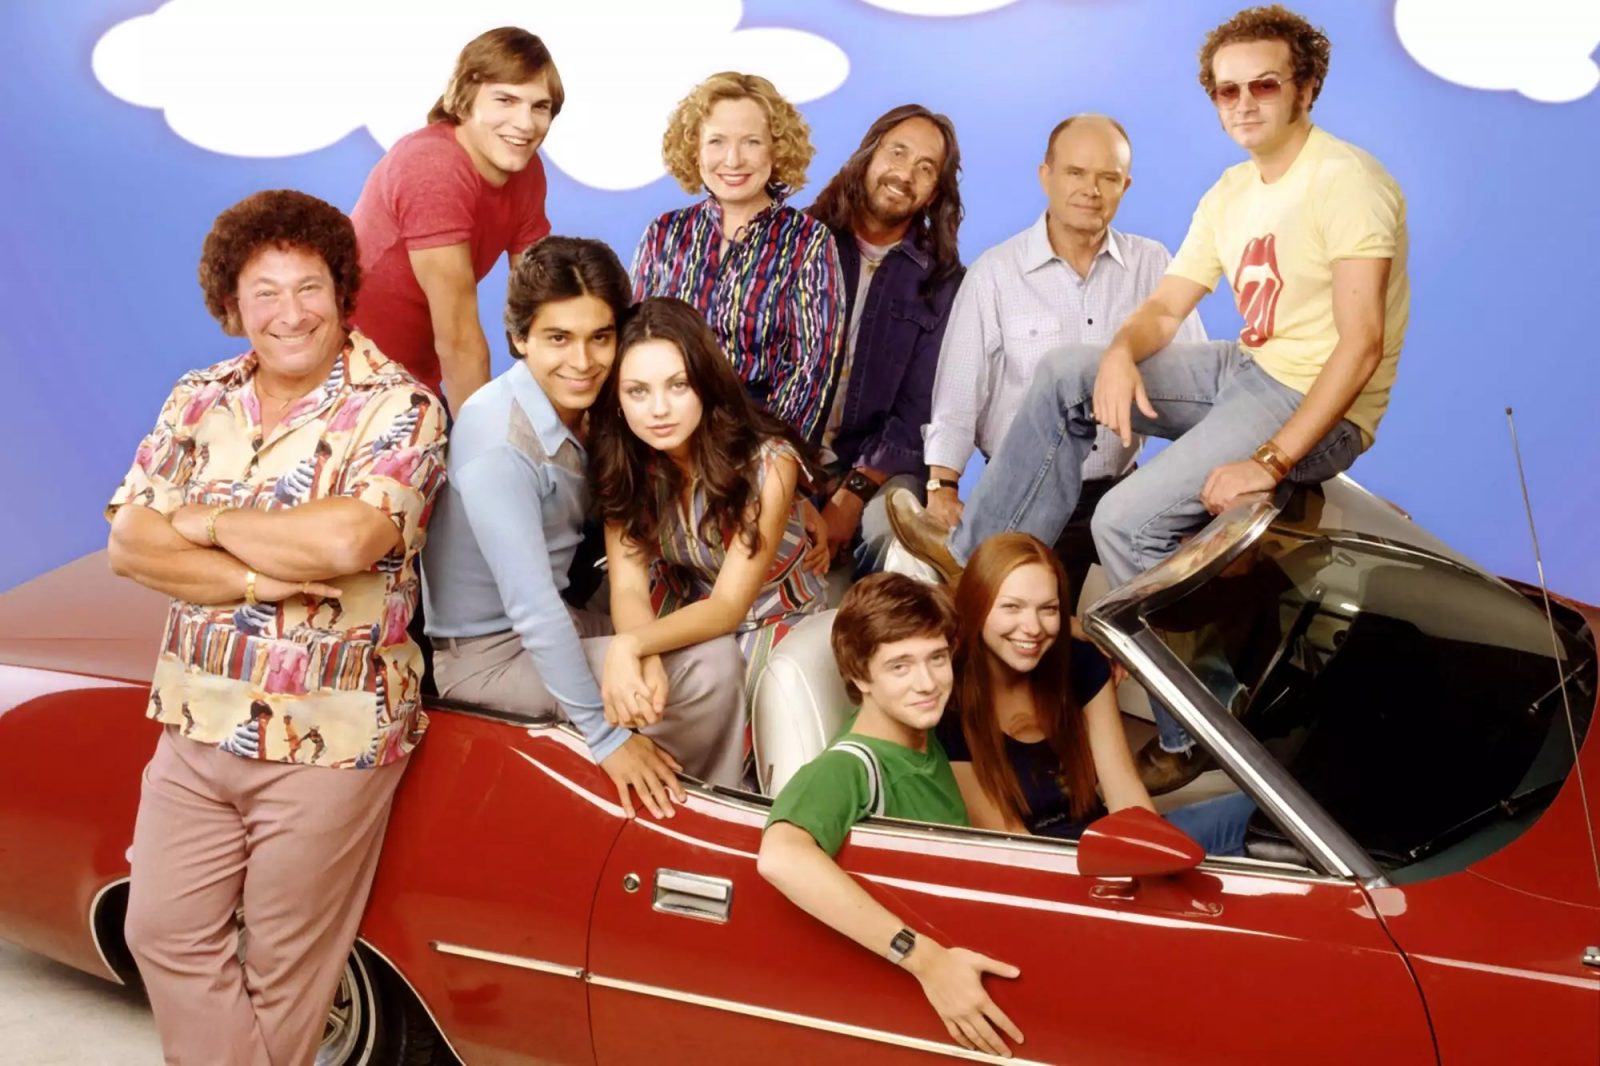 Can We Guess Your Age Based on the TV Characters You Find Most Attractive? That '70s Show